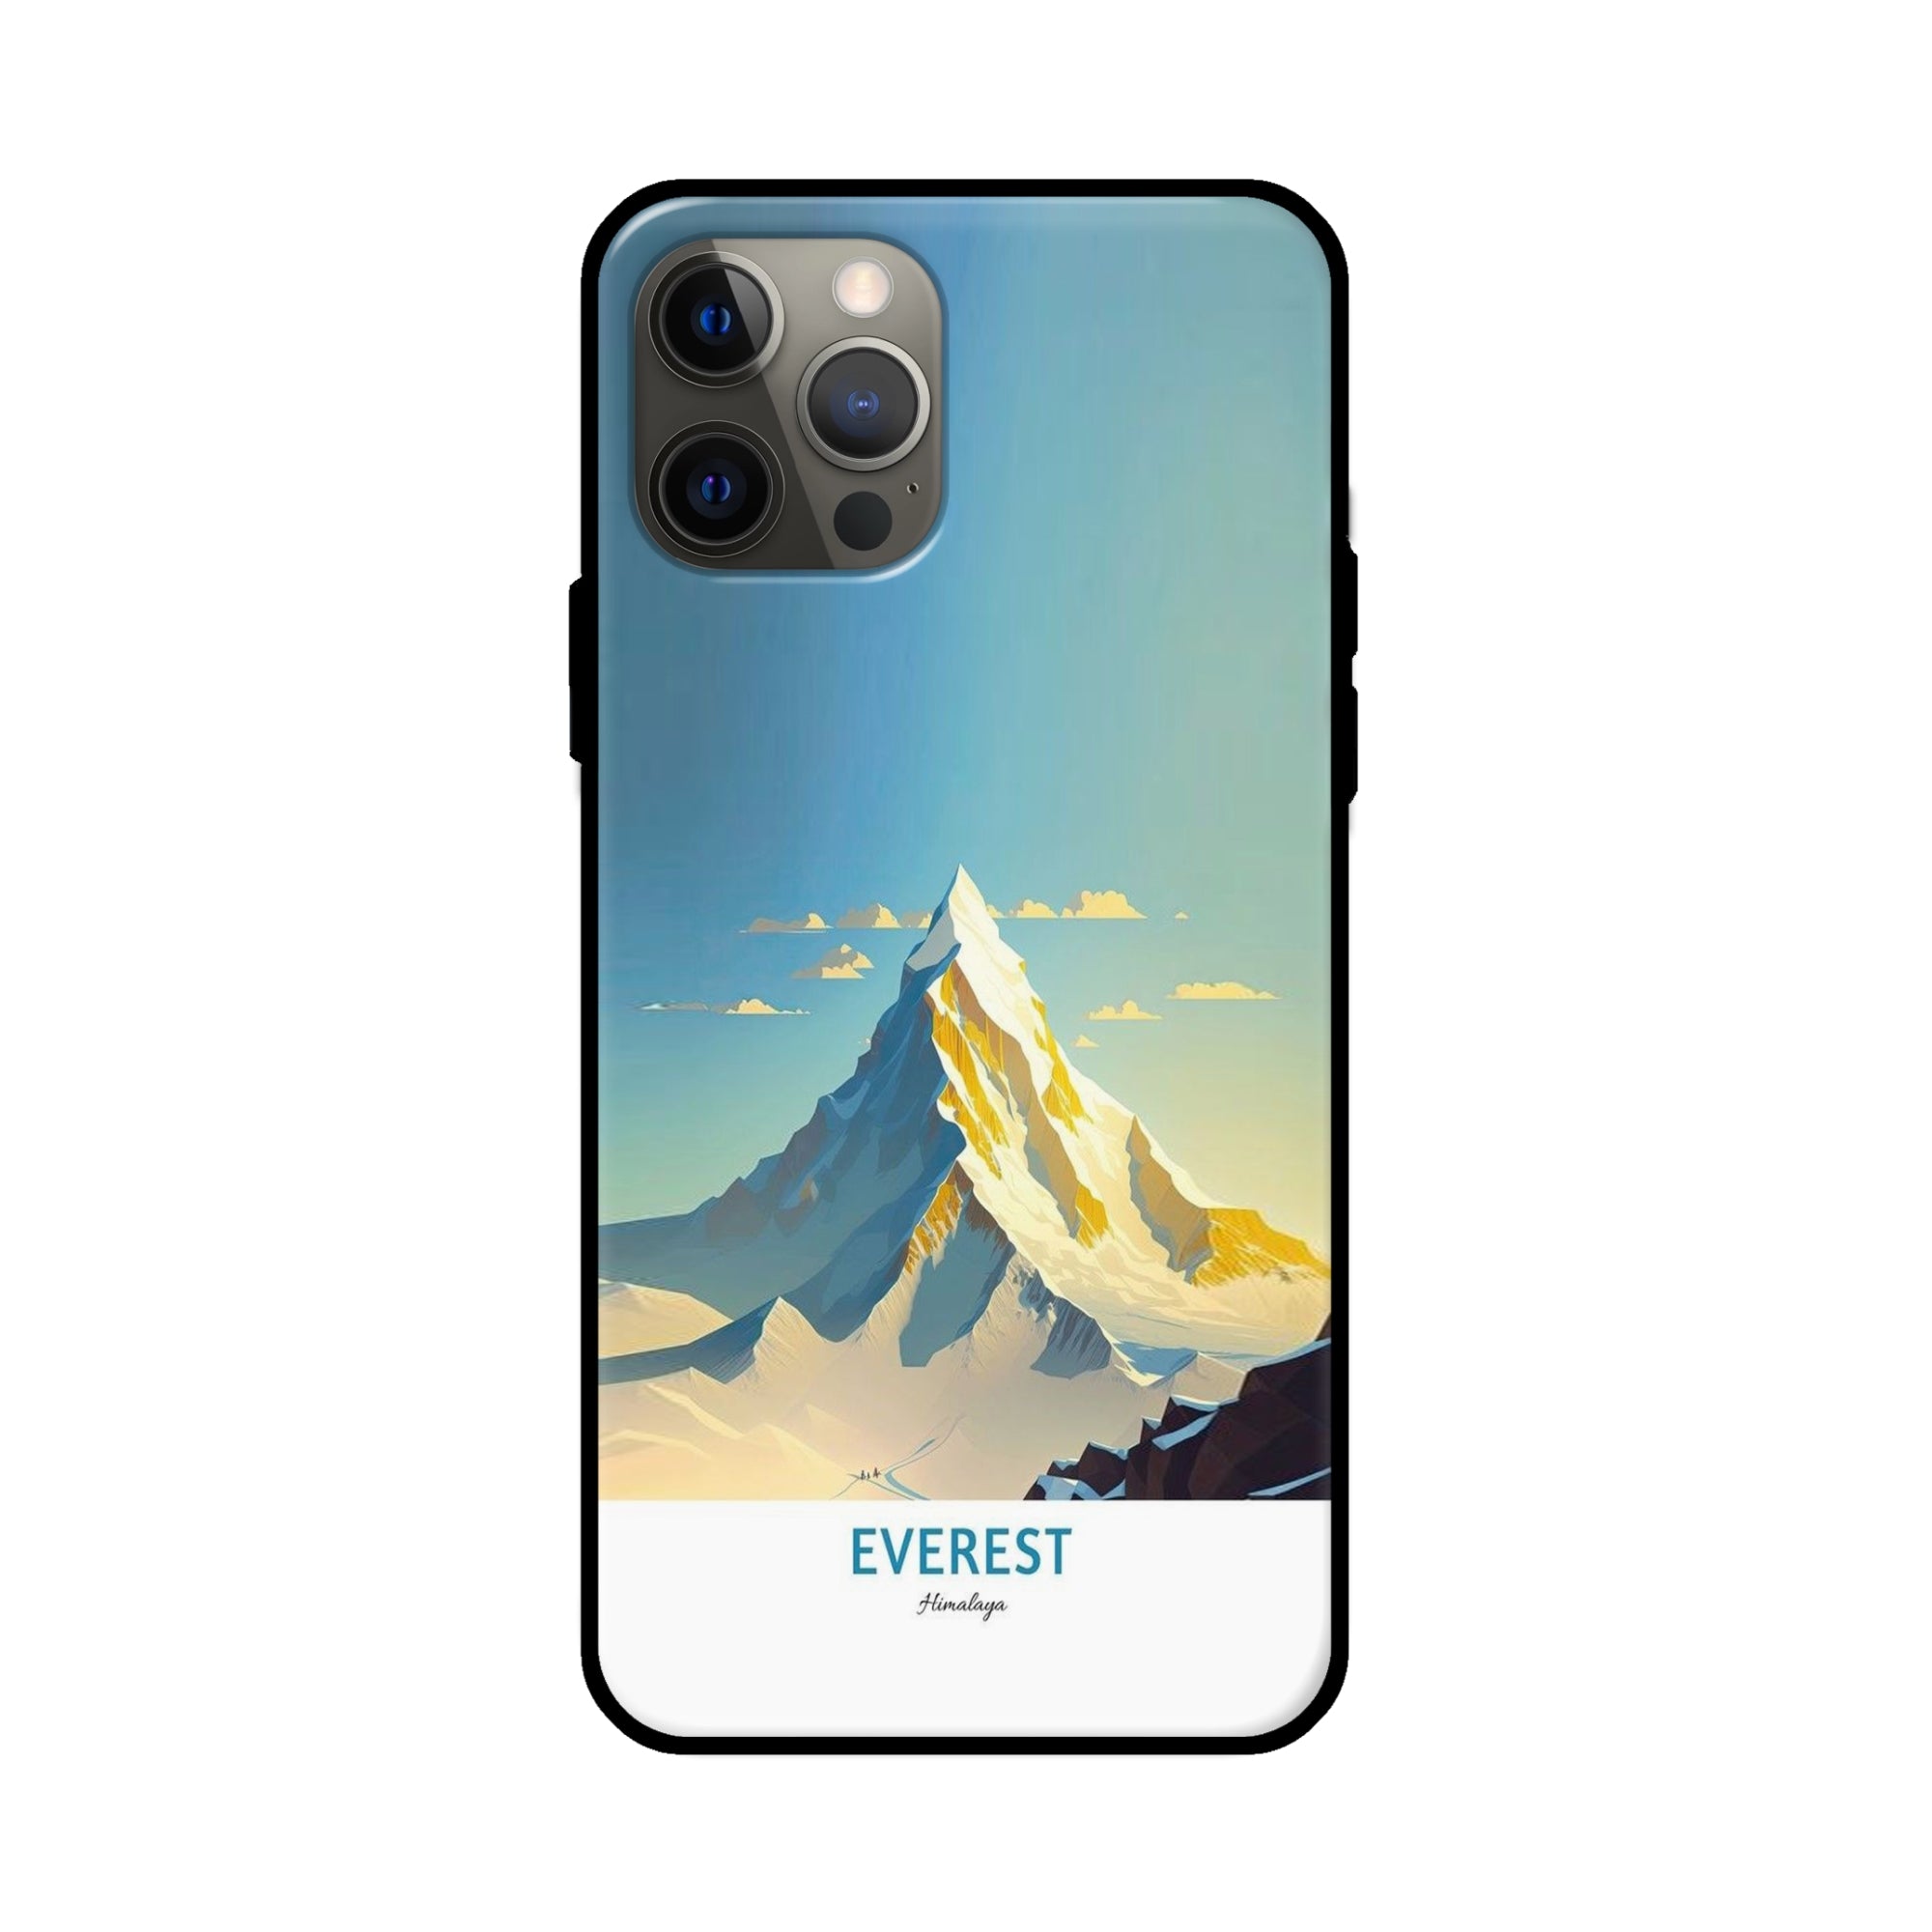 Buy Everest Glass/Metal Back Mobile Phone Case/Cover For Apple iPhone 12 pro Online